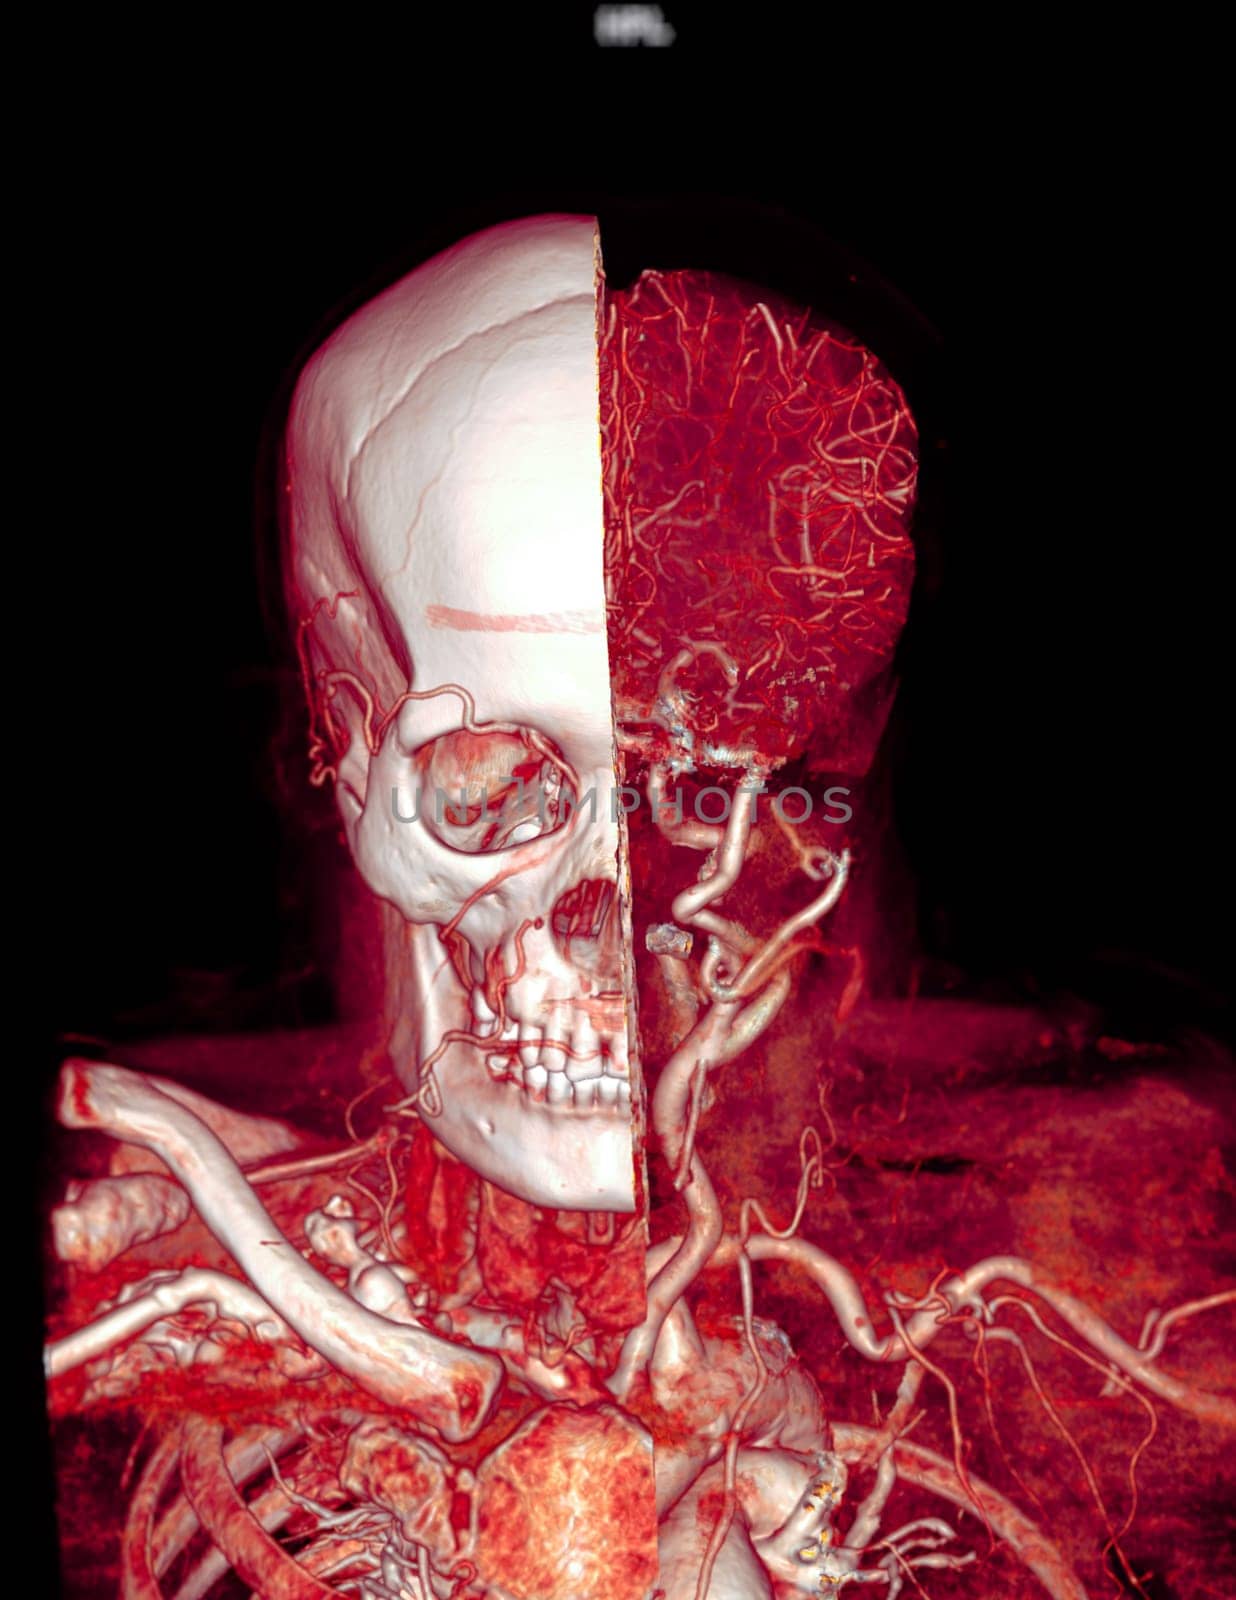  CTA brain and carotid artery or CT angiography of the brain  3D Rendering image . by samunella